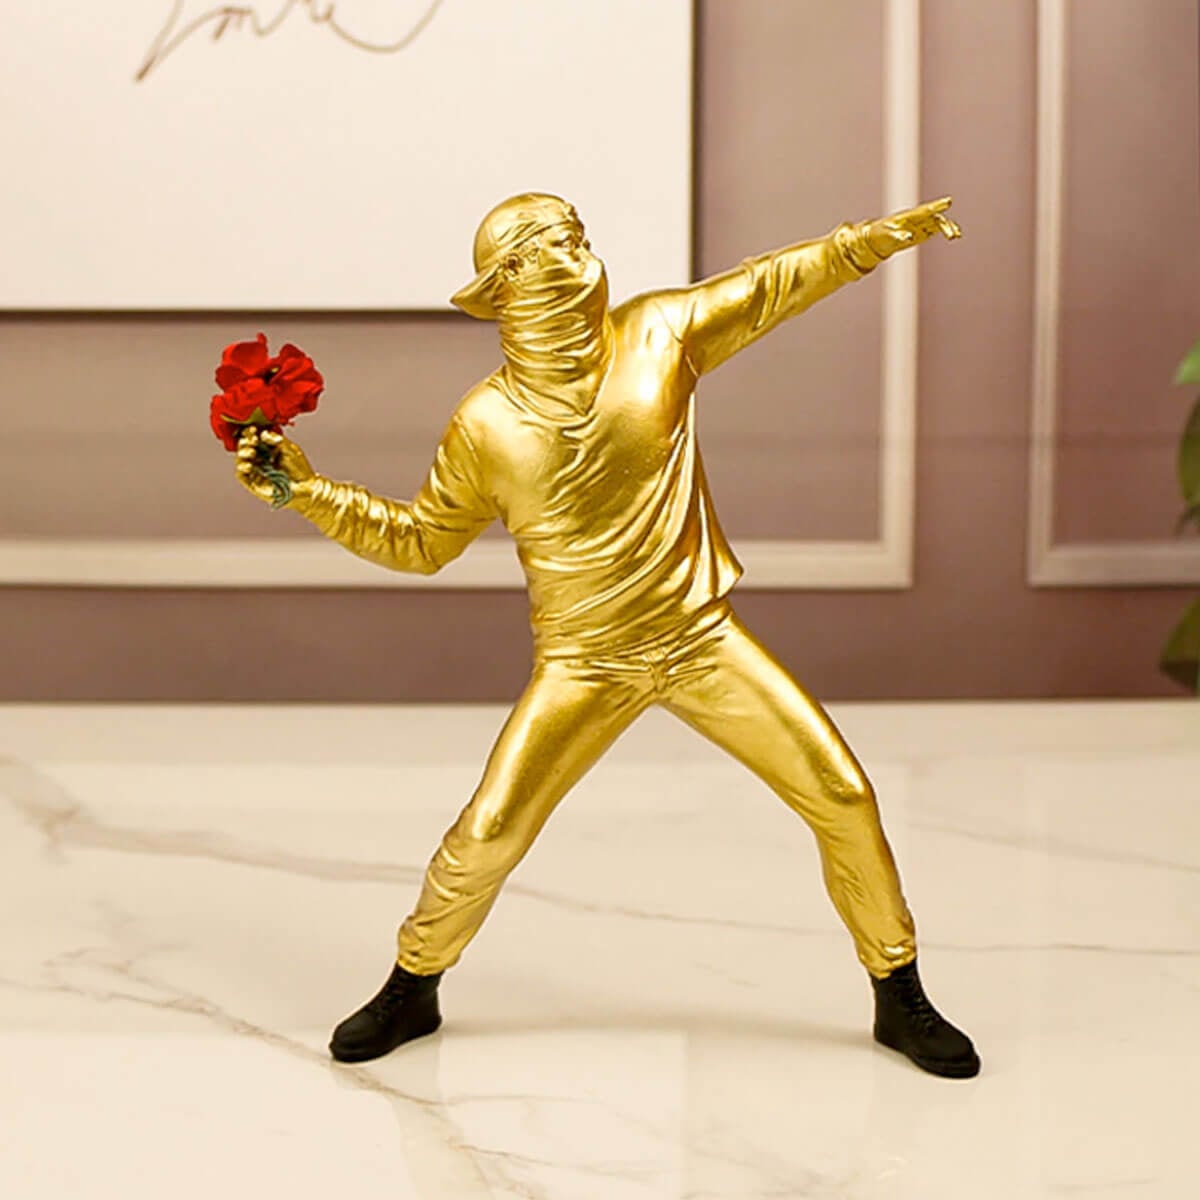 Unique Banksy Flower Thrower - Popular Art Sculpture Conveying Powerful Societal Themes